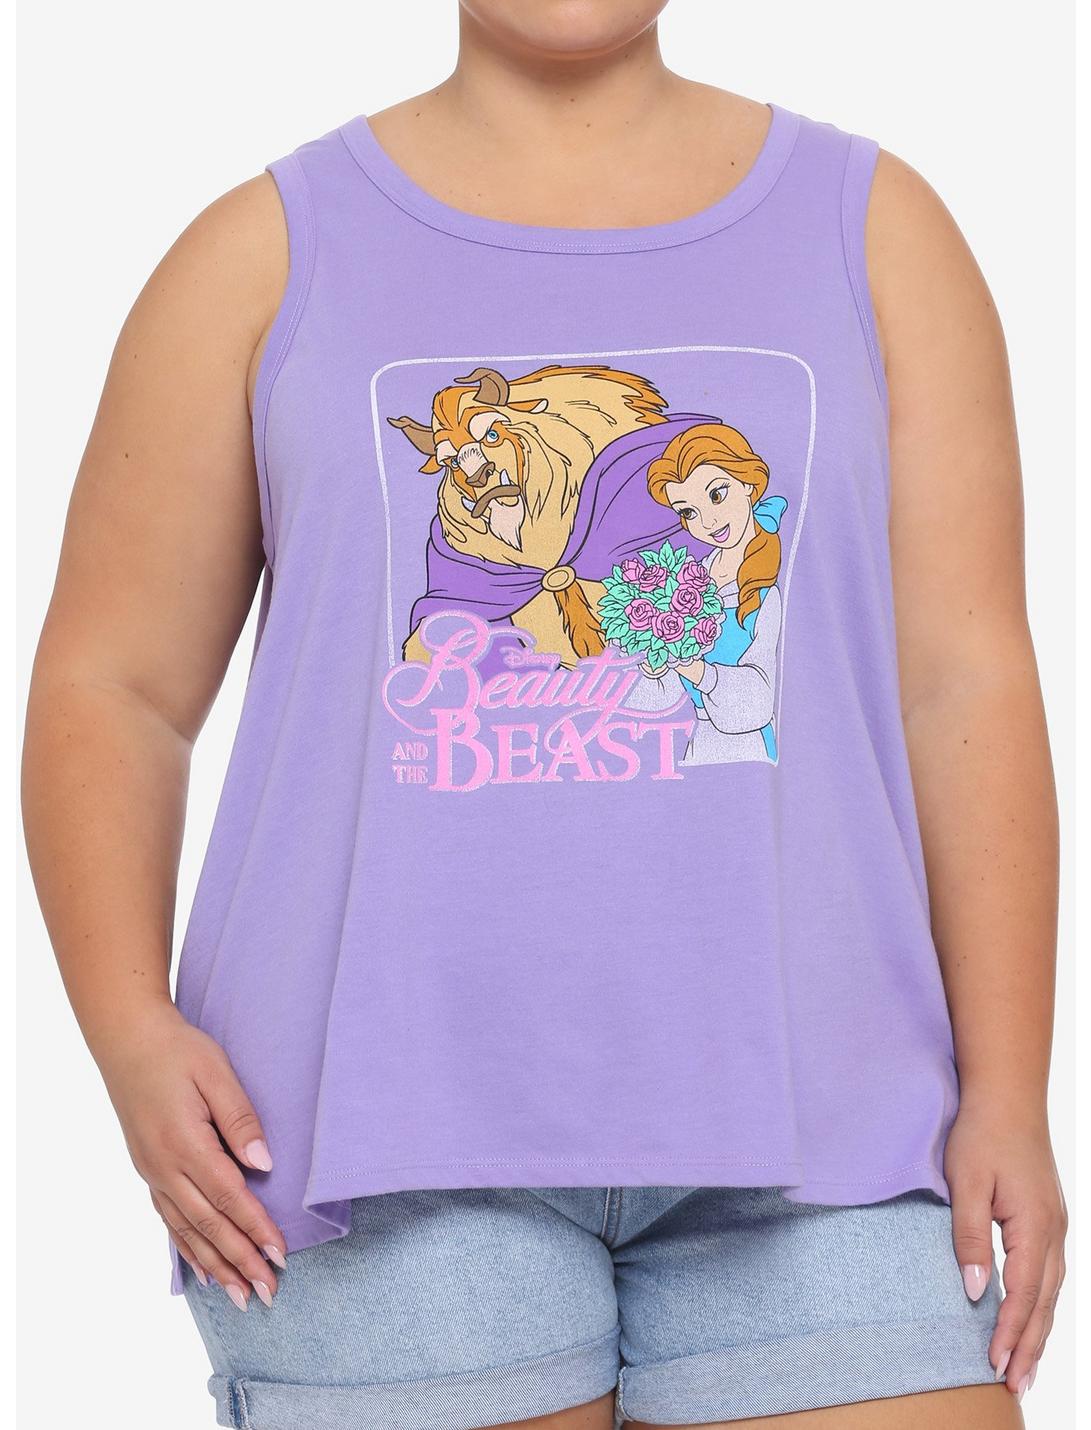 Disney Beauty And The Beast Book Cover Girls Tank Top Plus Size, MULTI, hi-res